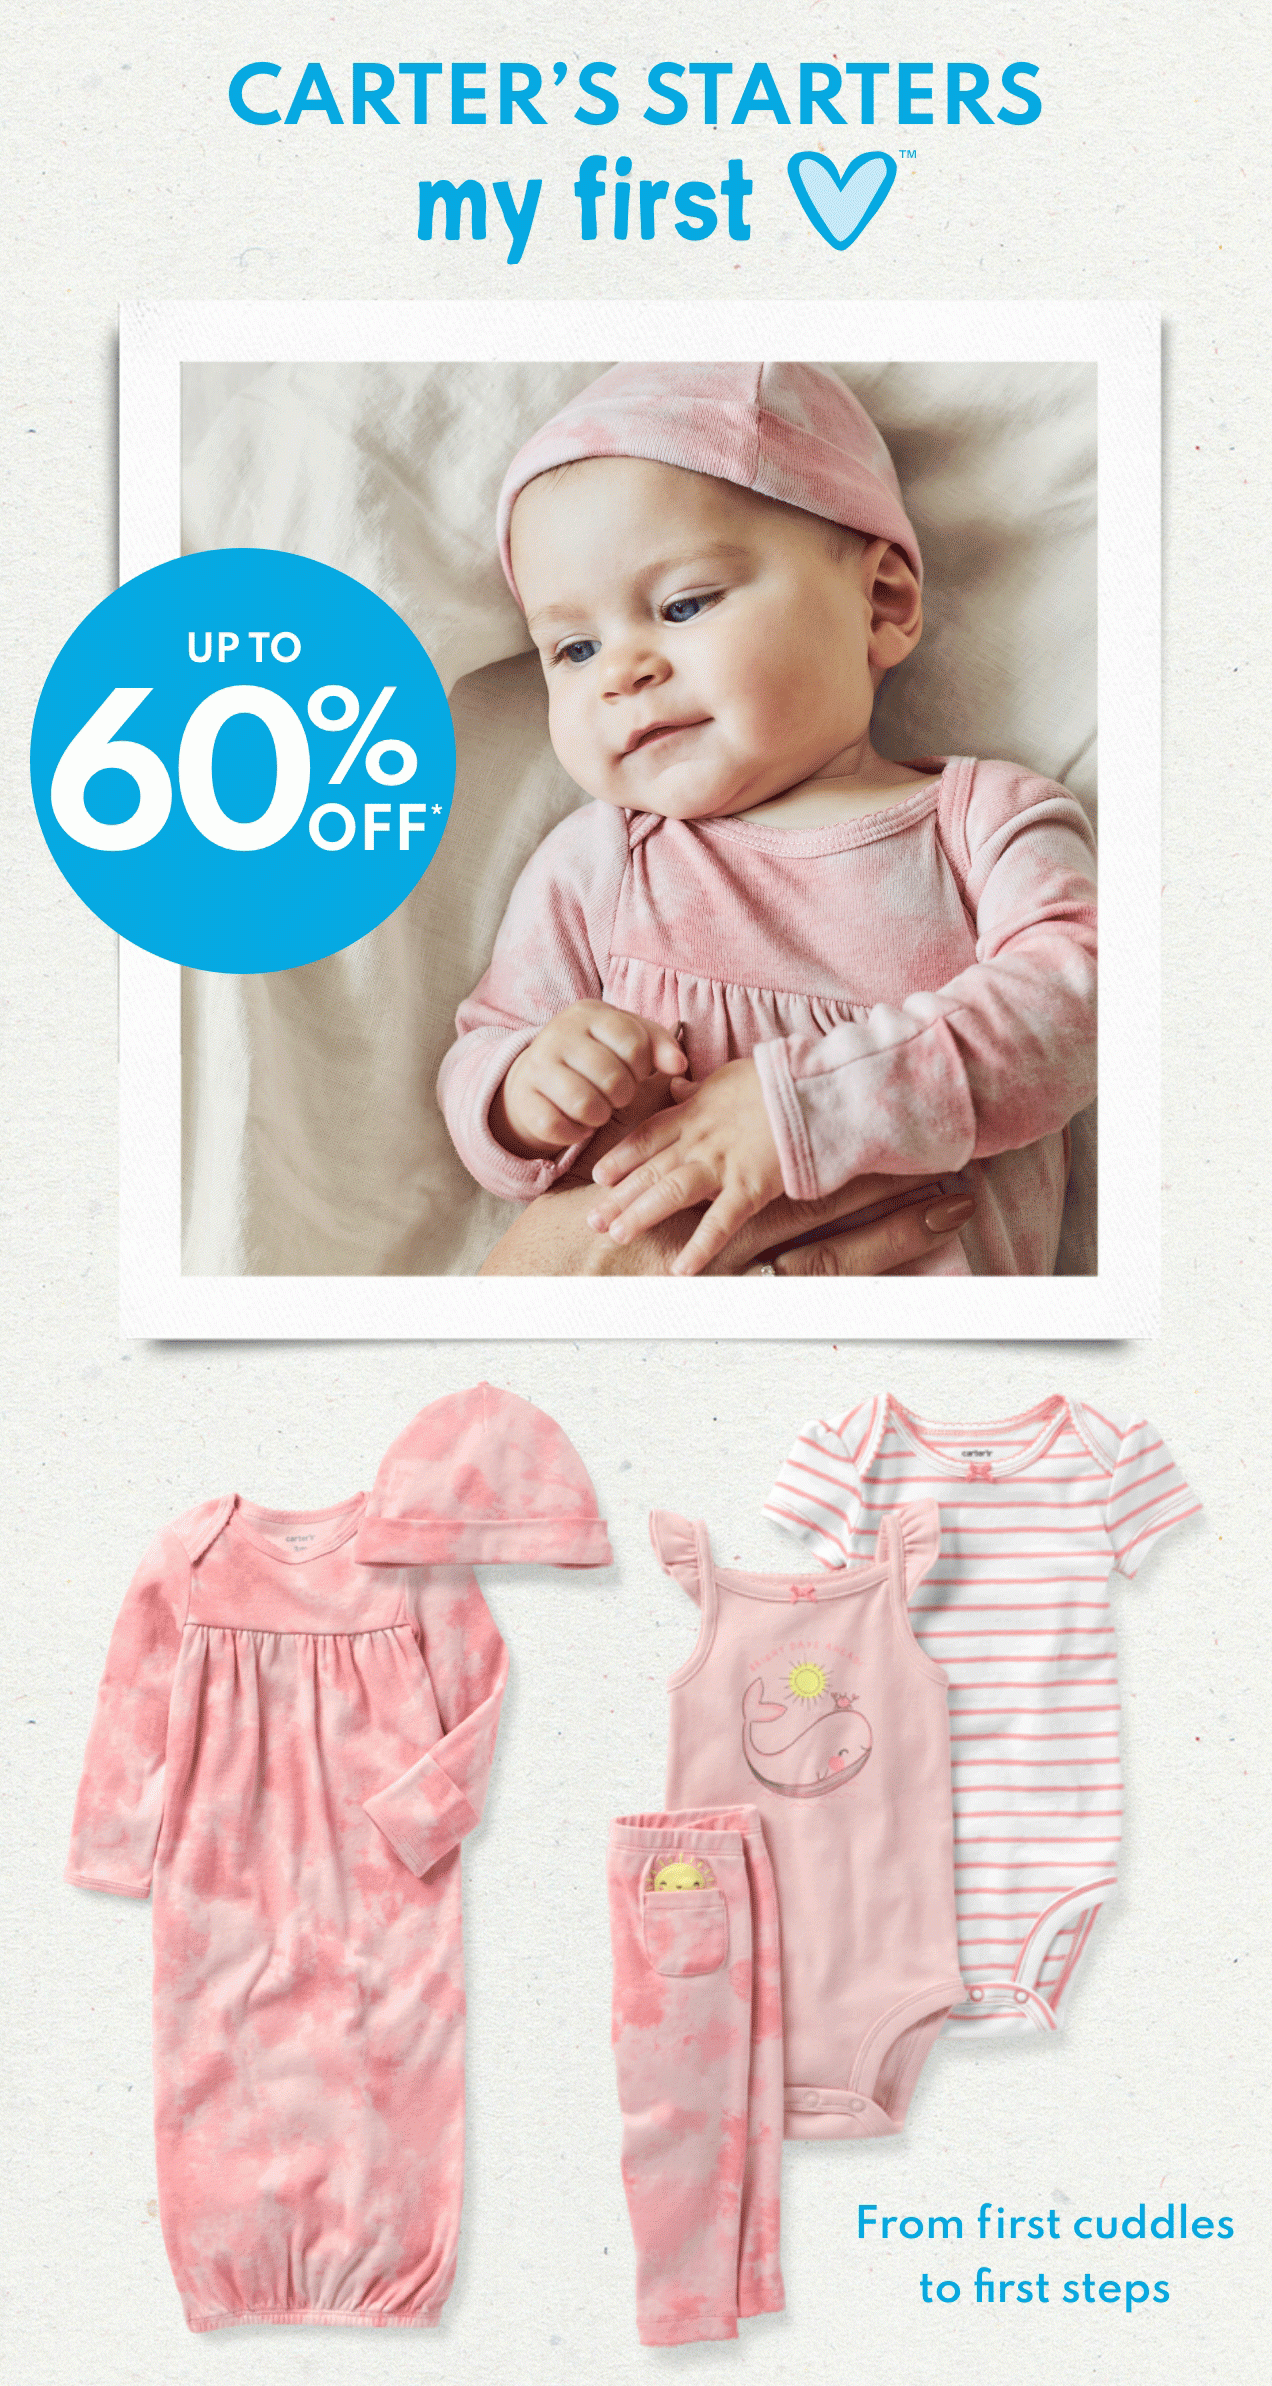 CARTER'S STARTERS | my first love | UP TO 60% OFF* | From first cuddles to first steps 